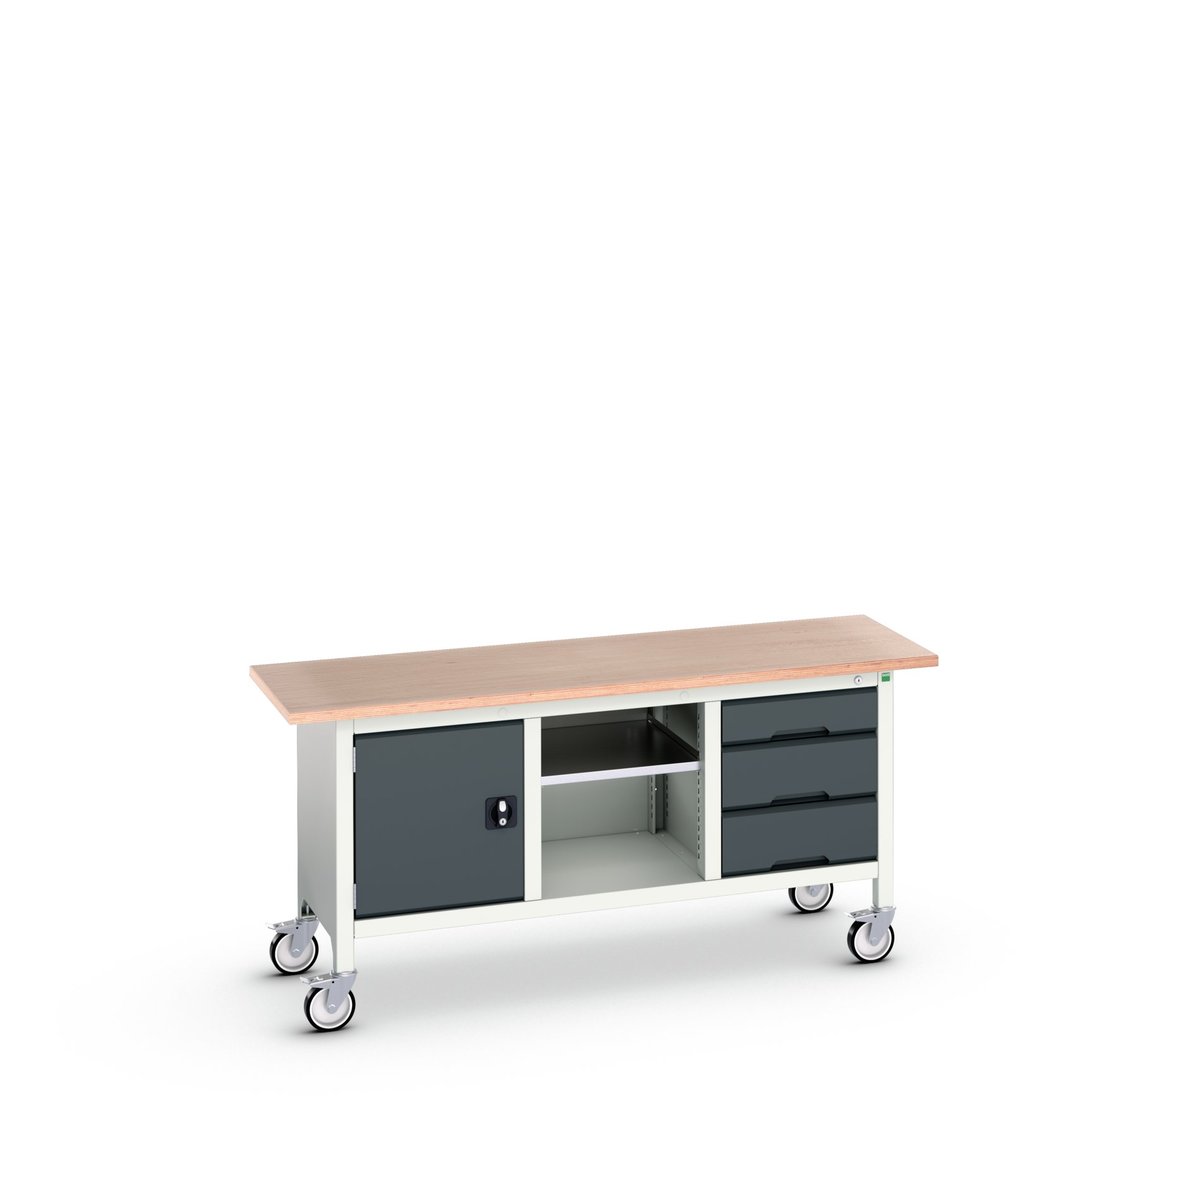 16923220. - verso mobile storage bench (mpx)